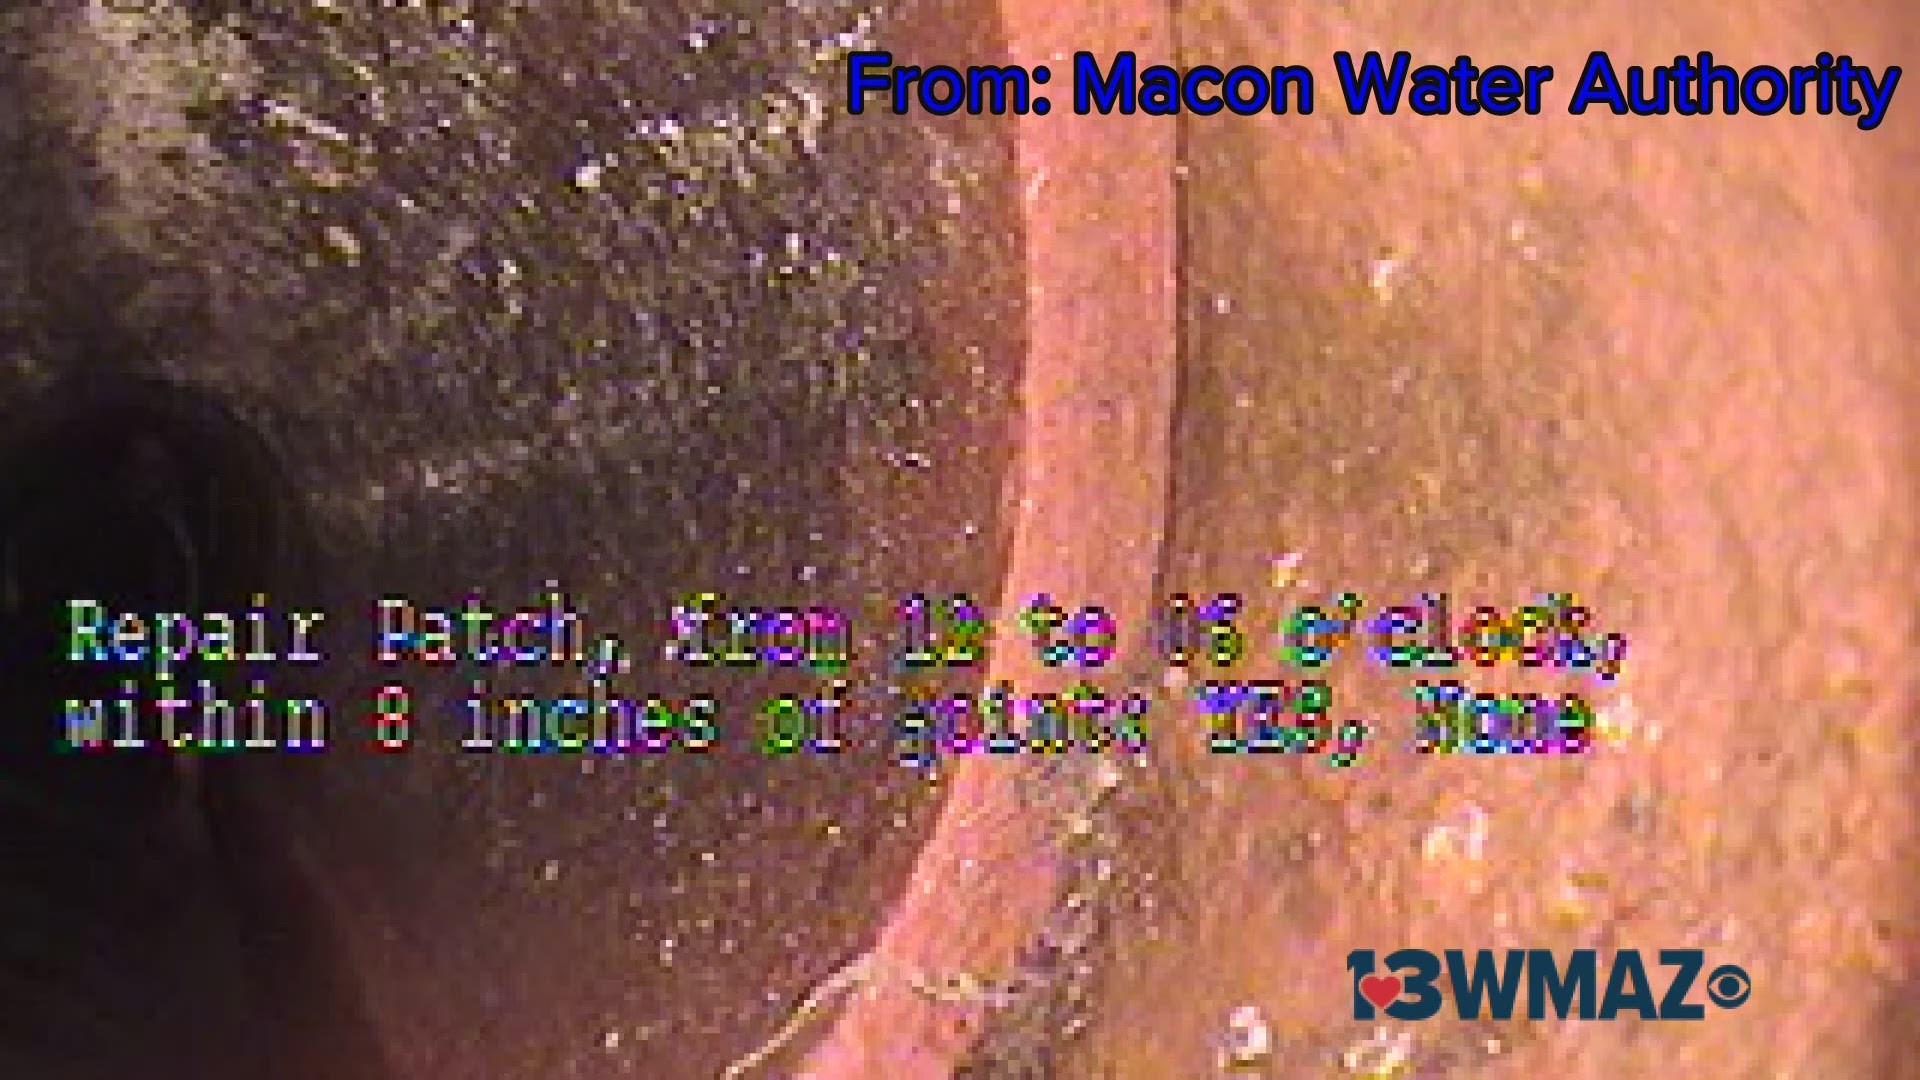 Bugs, blockages, roots, and grease. Crews checked more than 50 miles of line by camera to try to catch problems before they became spills. Here's what it looks like inside a sewer line.